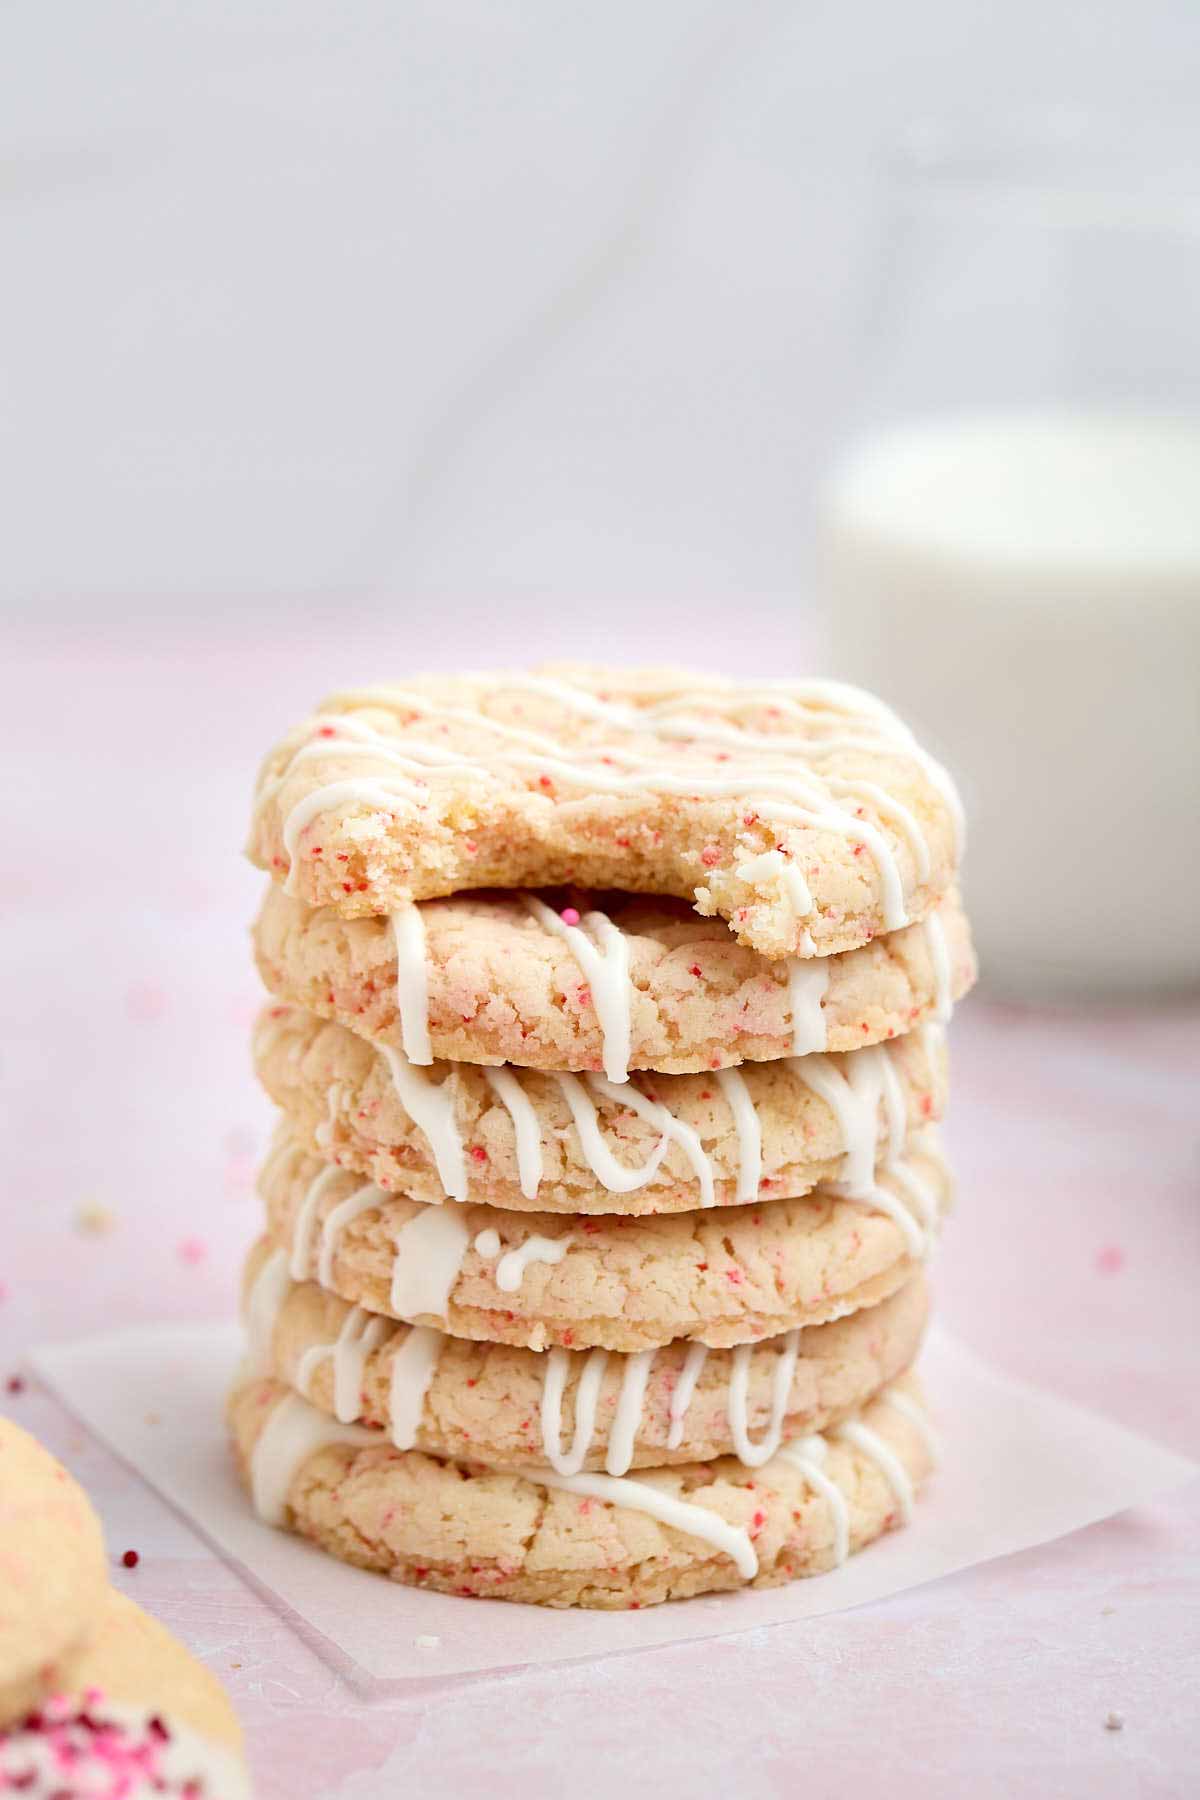 Stack of white chocolate drizzled cherry chip cookies. The top cookie has a bite taken out of it.